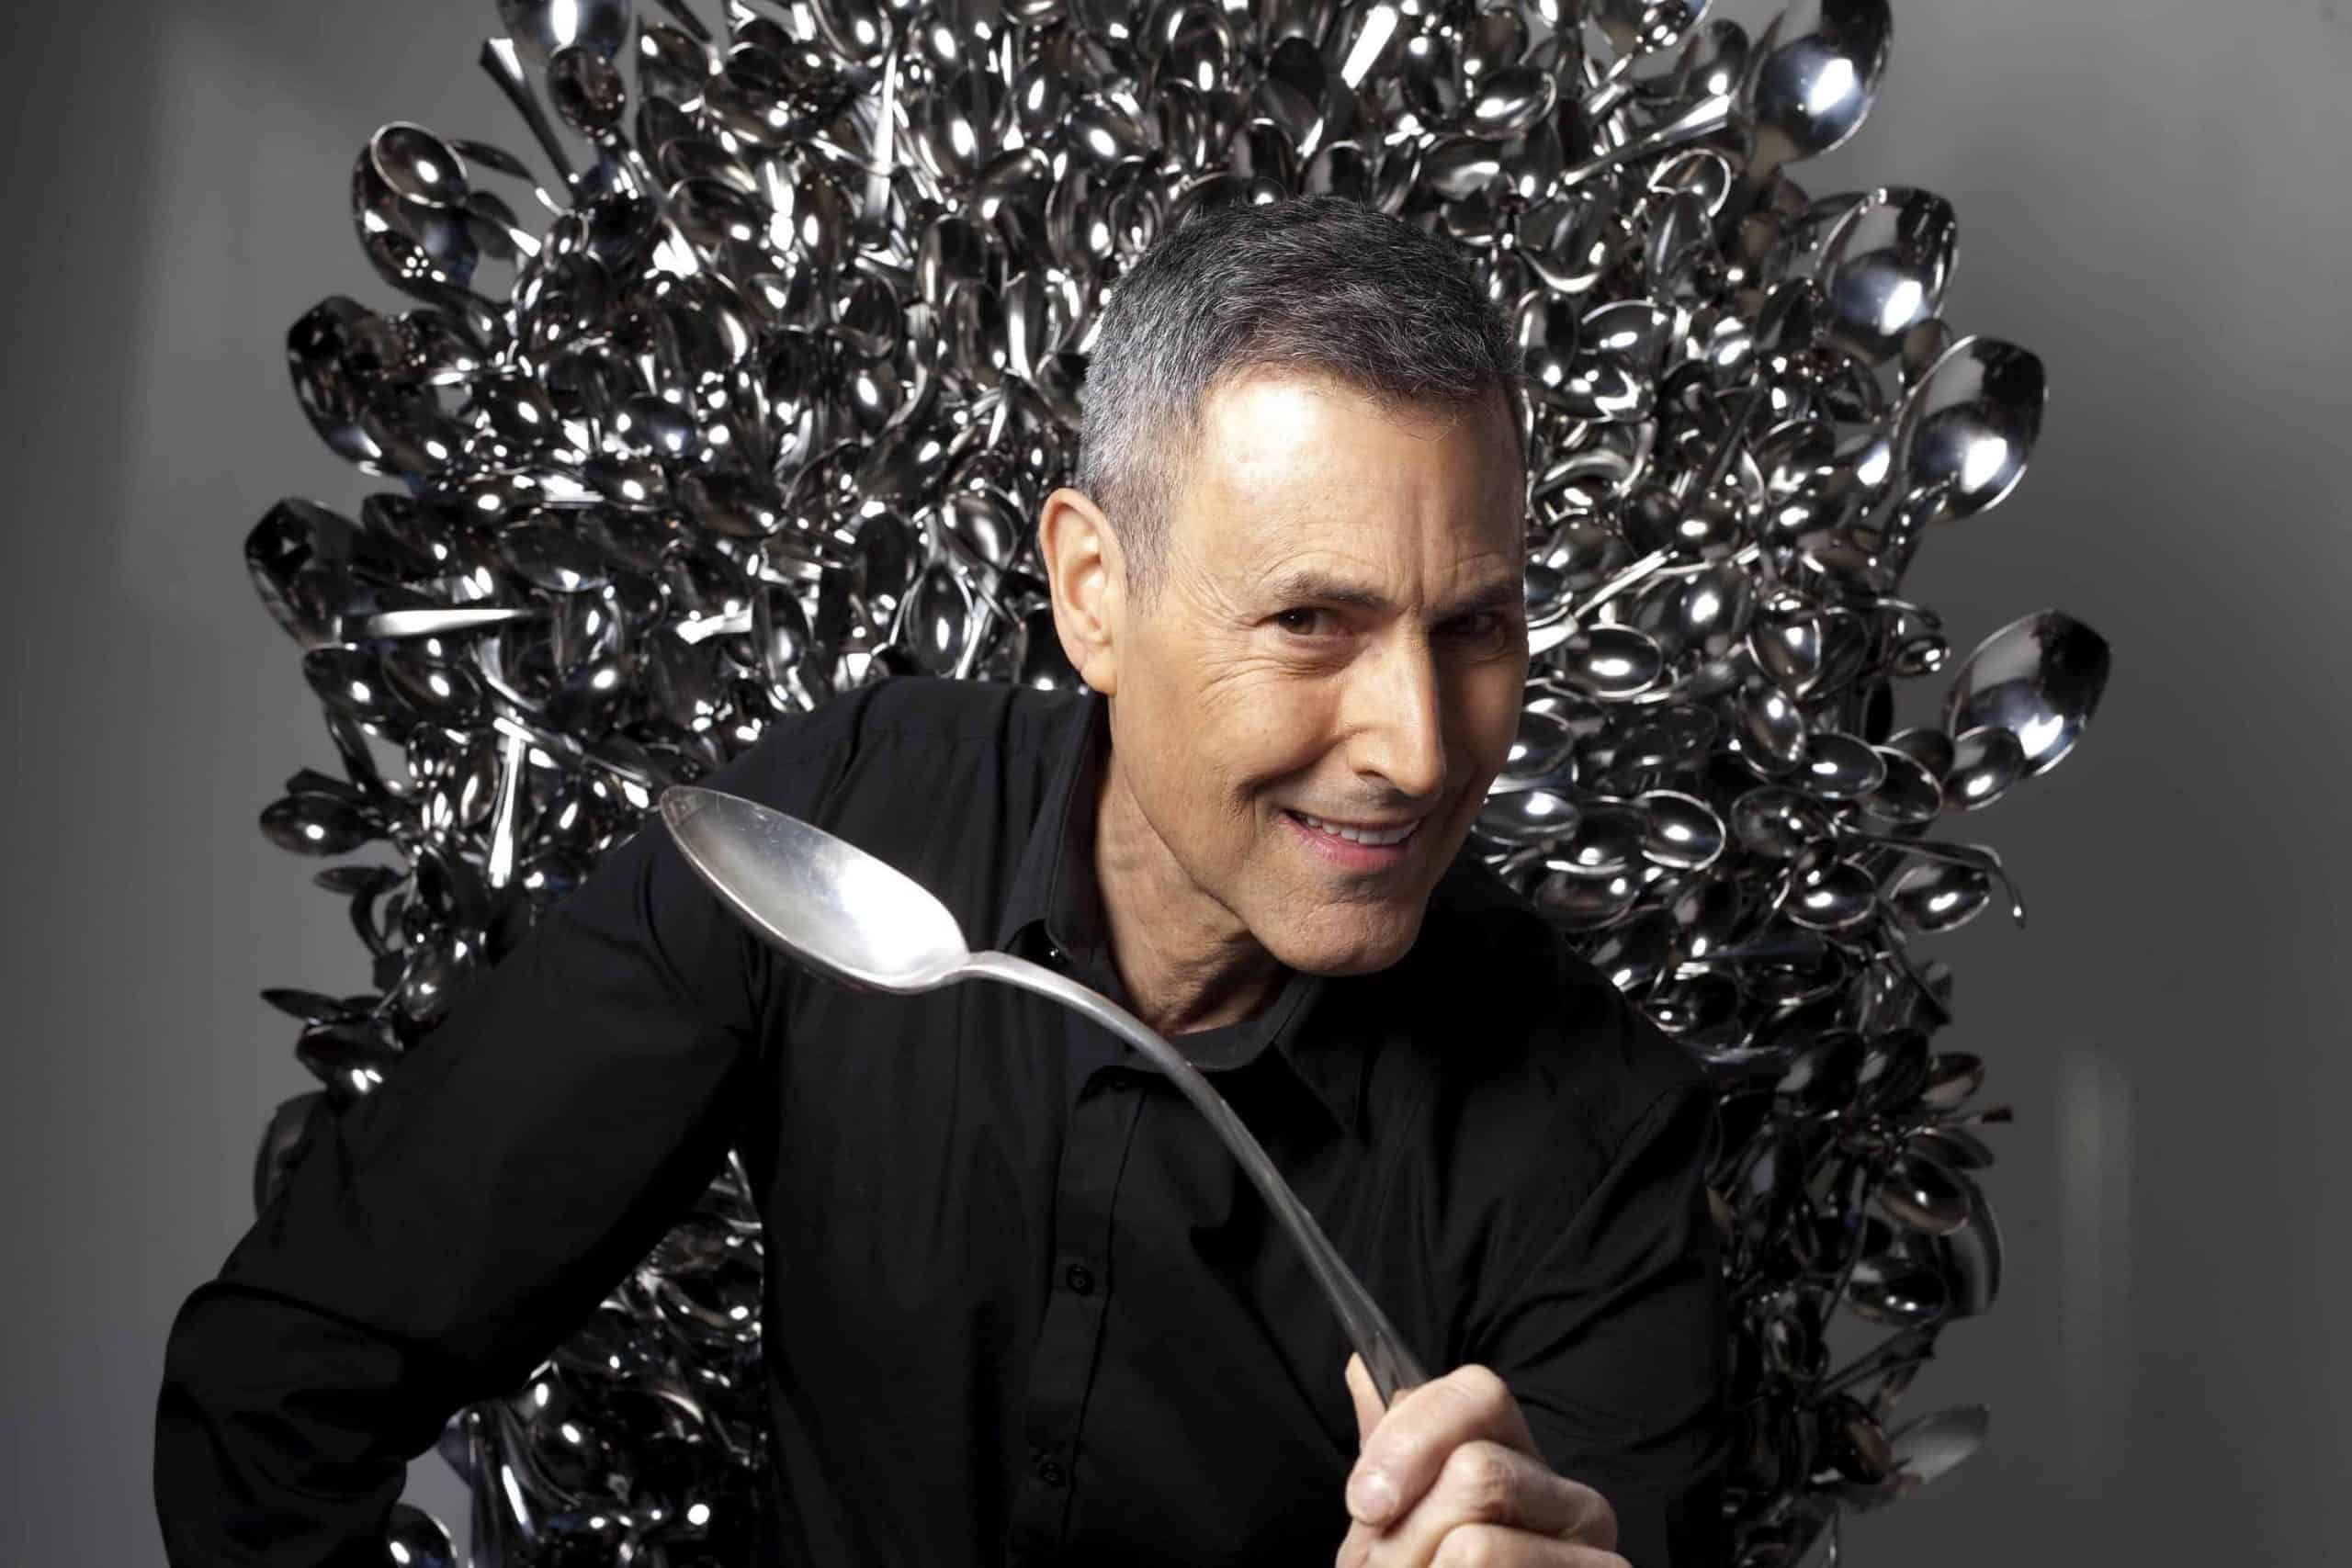 Uri Geller answers call for ‘weirdos’ to apply for jobs in Number 10